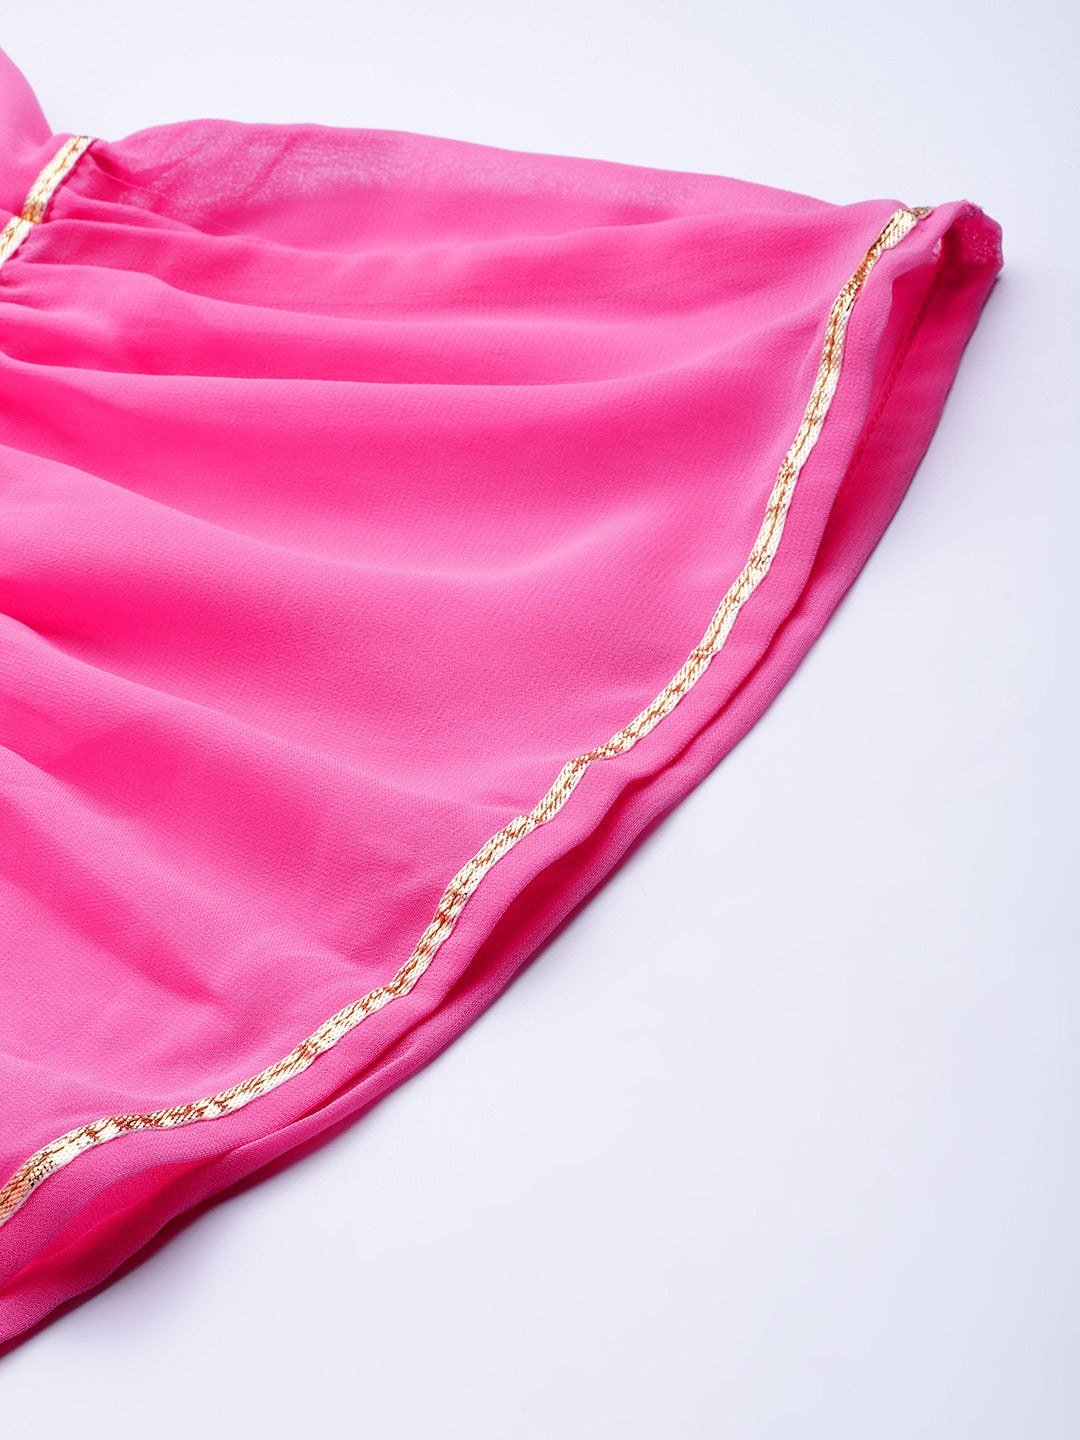 Women Pink Tiered Palazzo With Attached Pallu